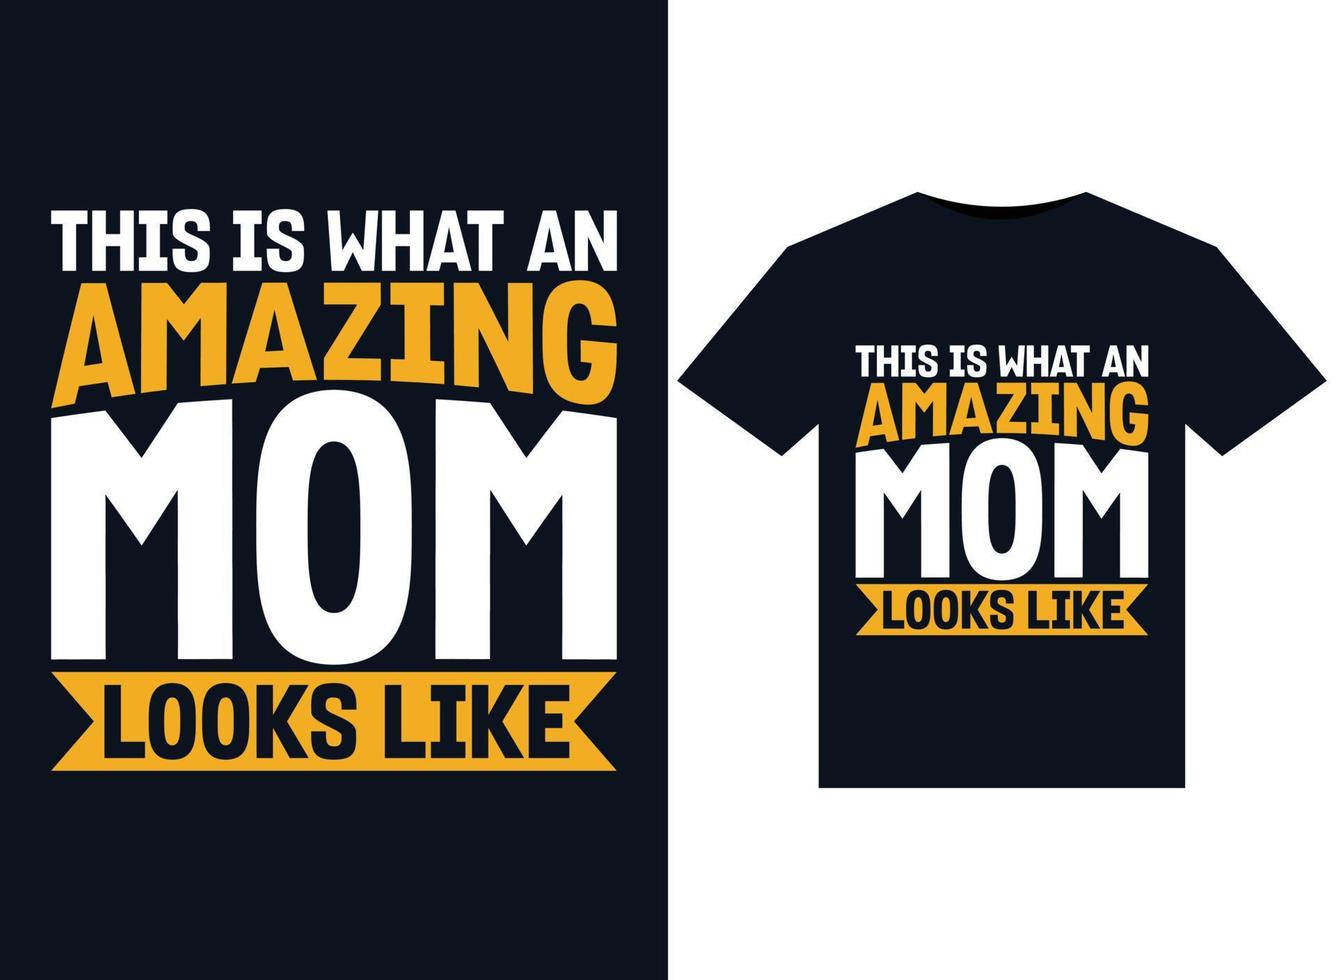 This Is What An Amazing Mom Looks Like illustrations for print-ready T-Shirts design vector